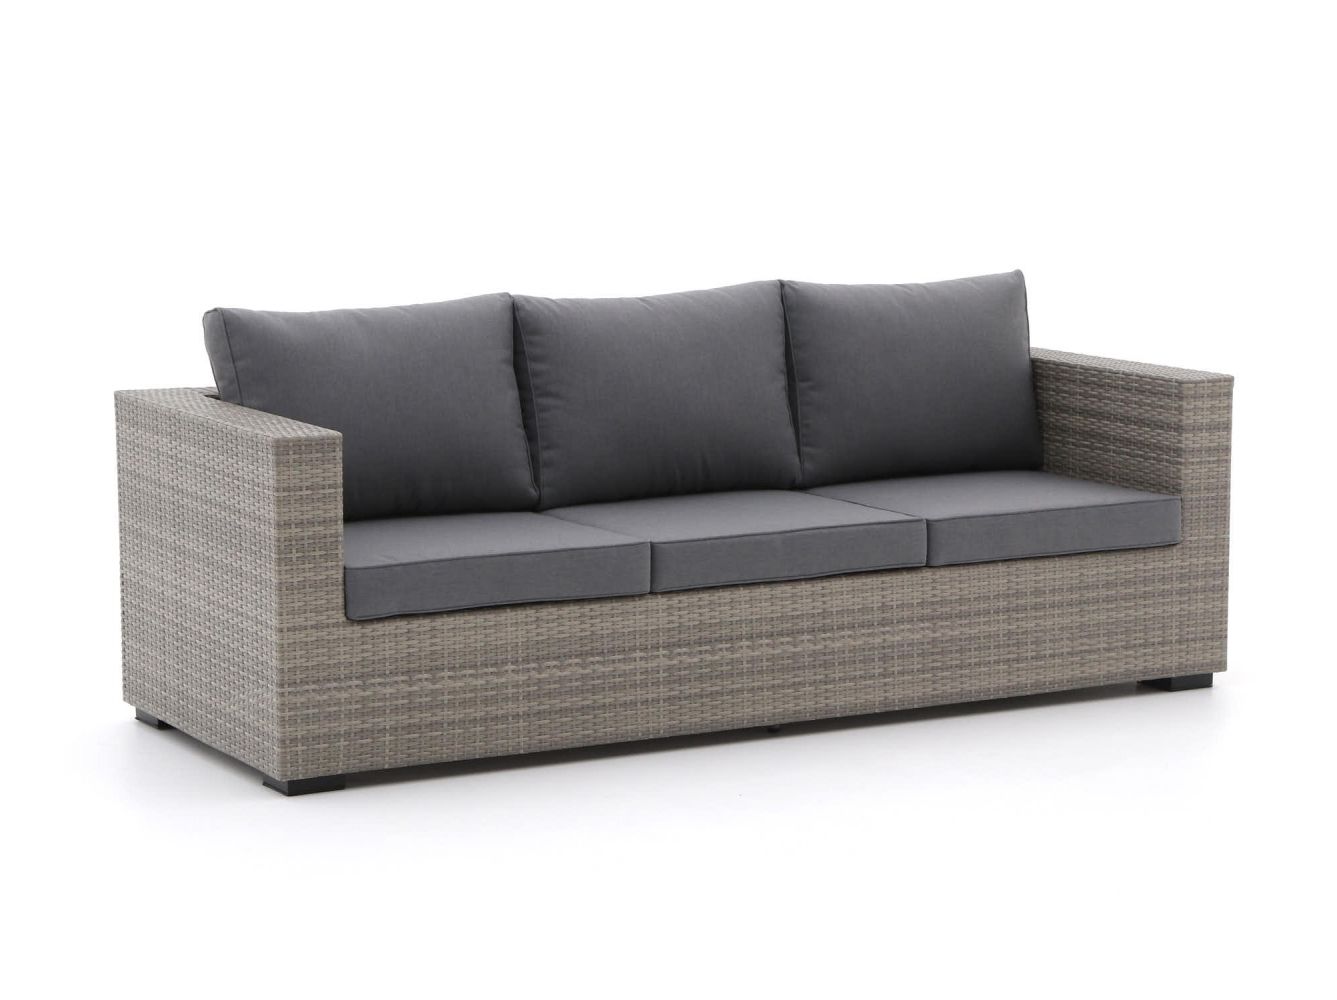 dood inhalen tack Forza Giotto lounge tuinbank 3-zits 230cm - Ash grey (incl. kussens) - Kees  Smit